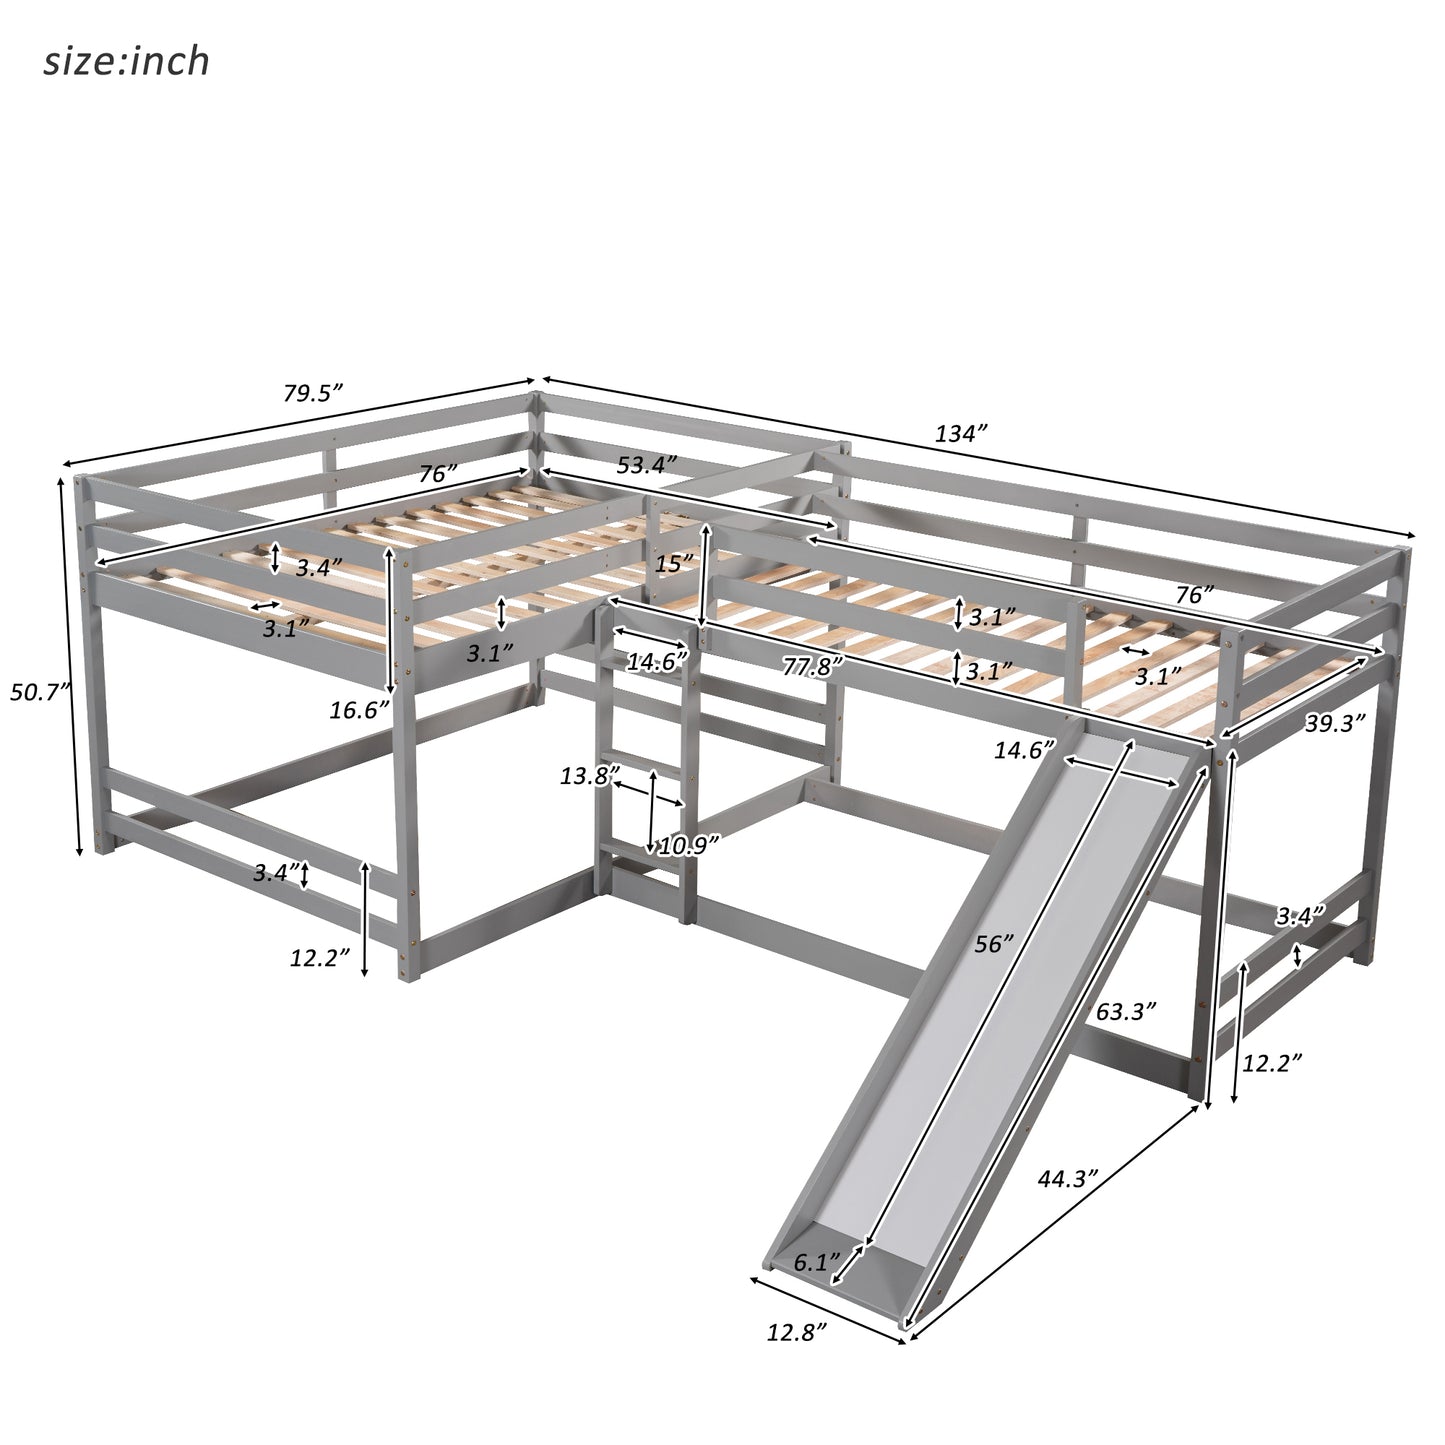 Full and Twin Size L-Shaped Bunk Bed with Slide and Short Ladder,Gray